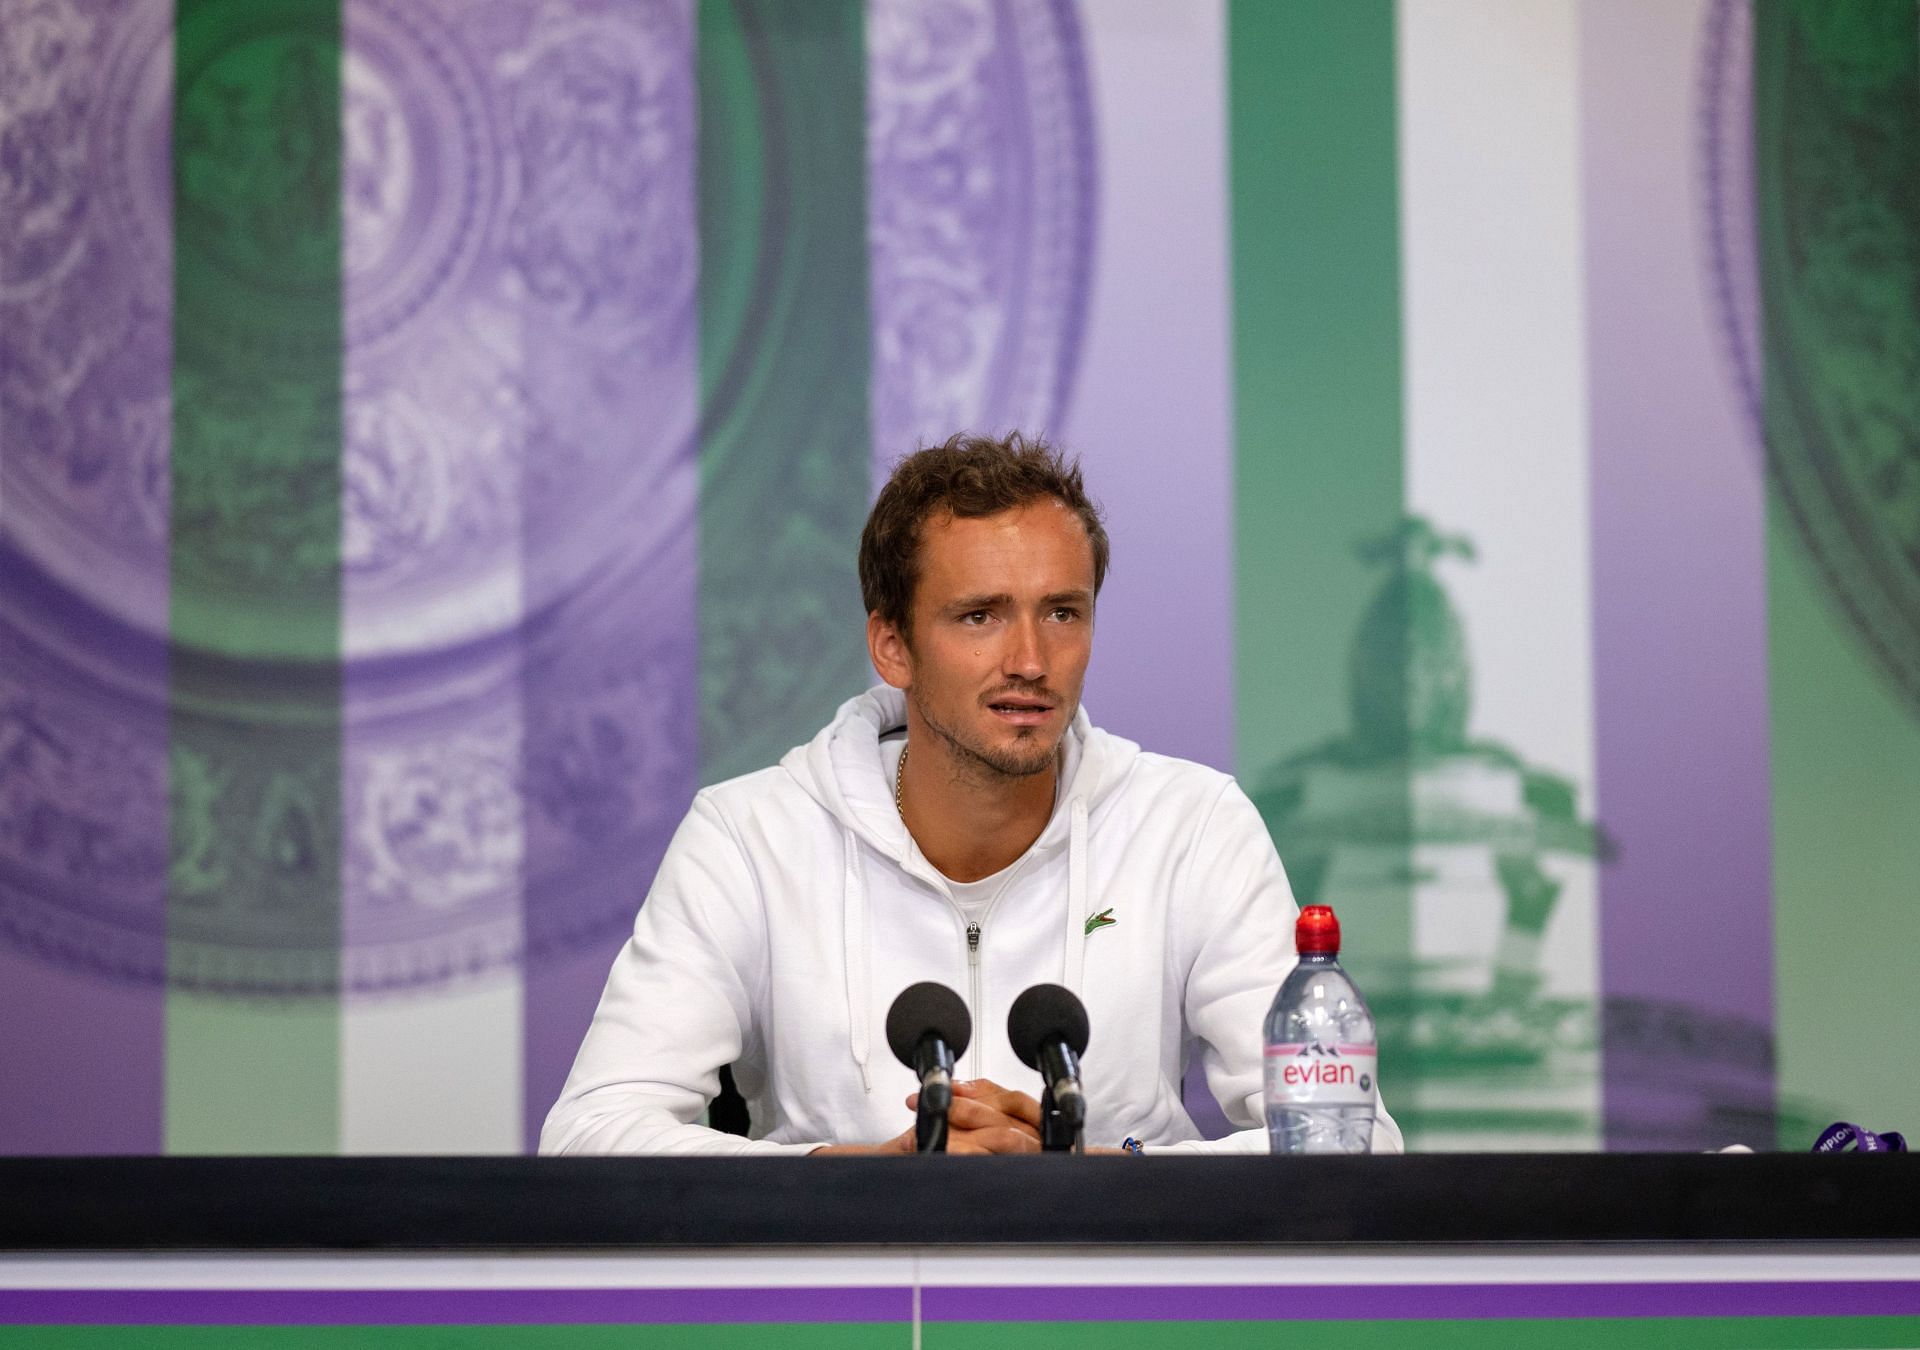 Daniil Medvedev could become the World No. 1 despite not competing at Wimbledon this year